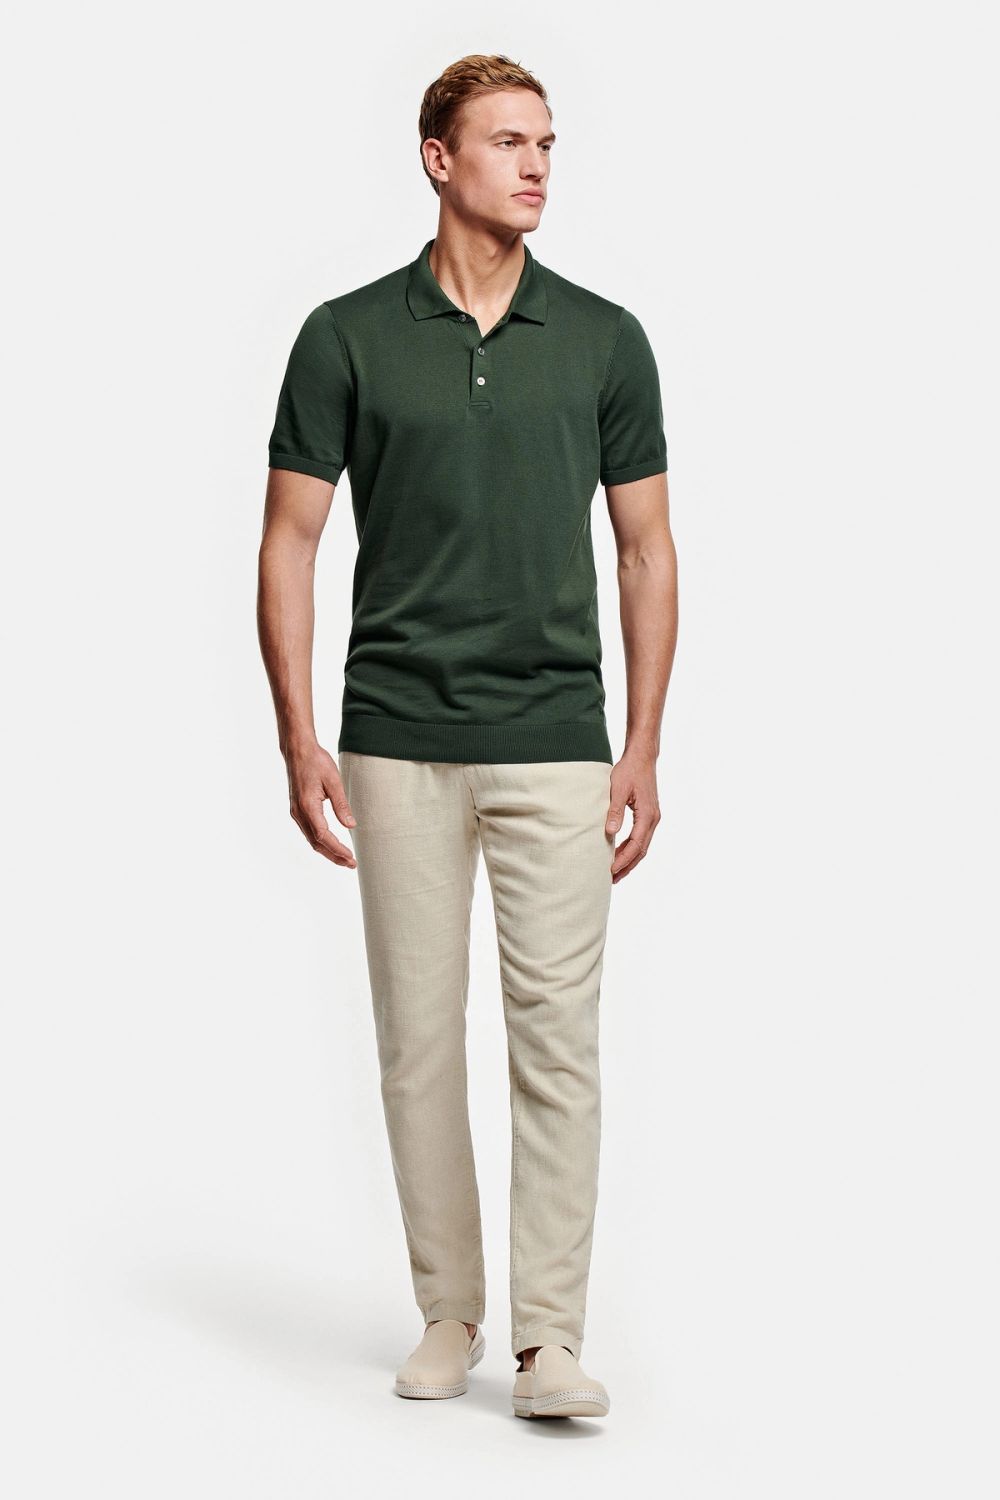 Fairways * The Knitted Polo